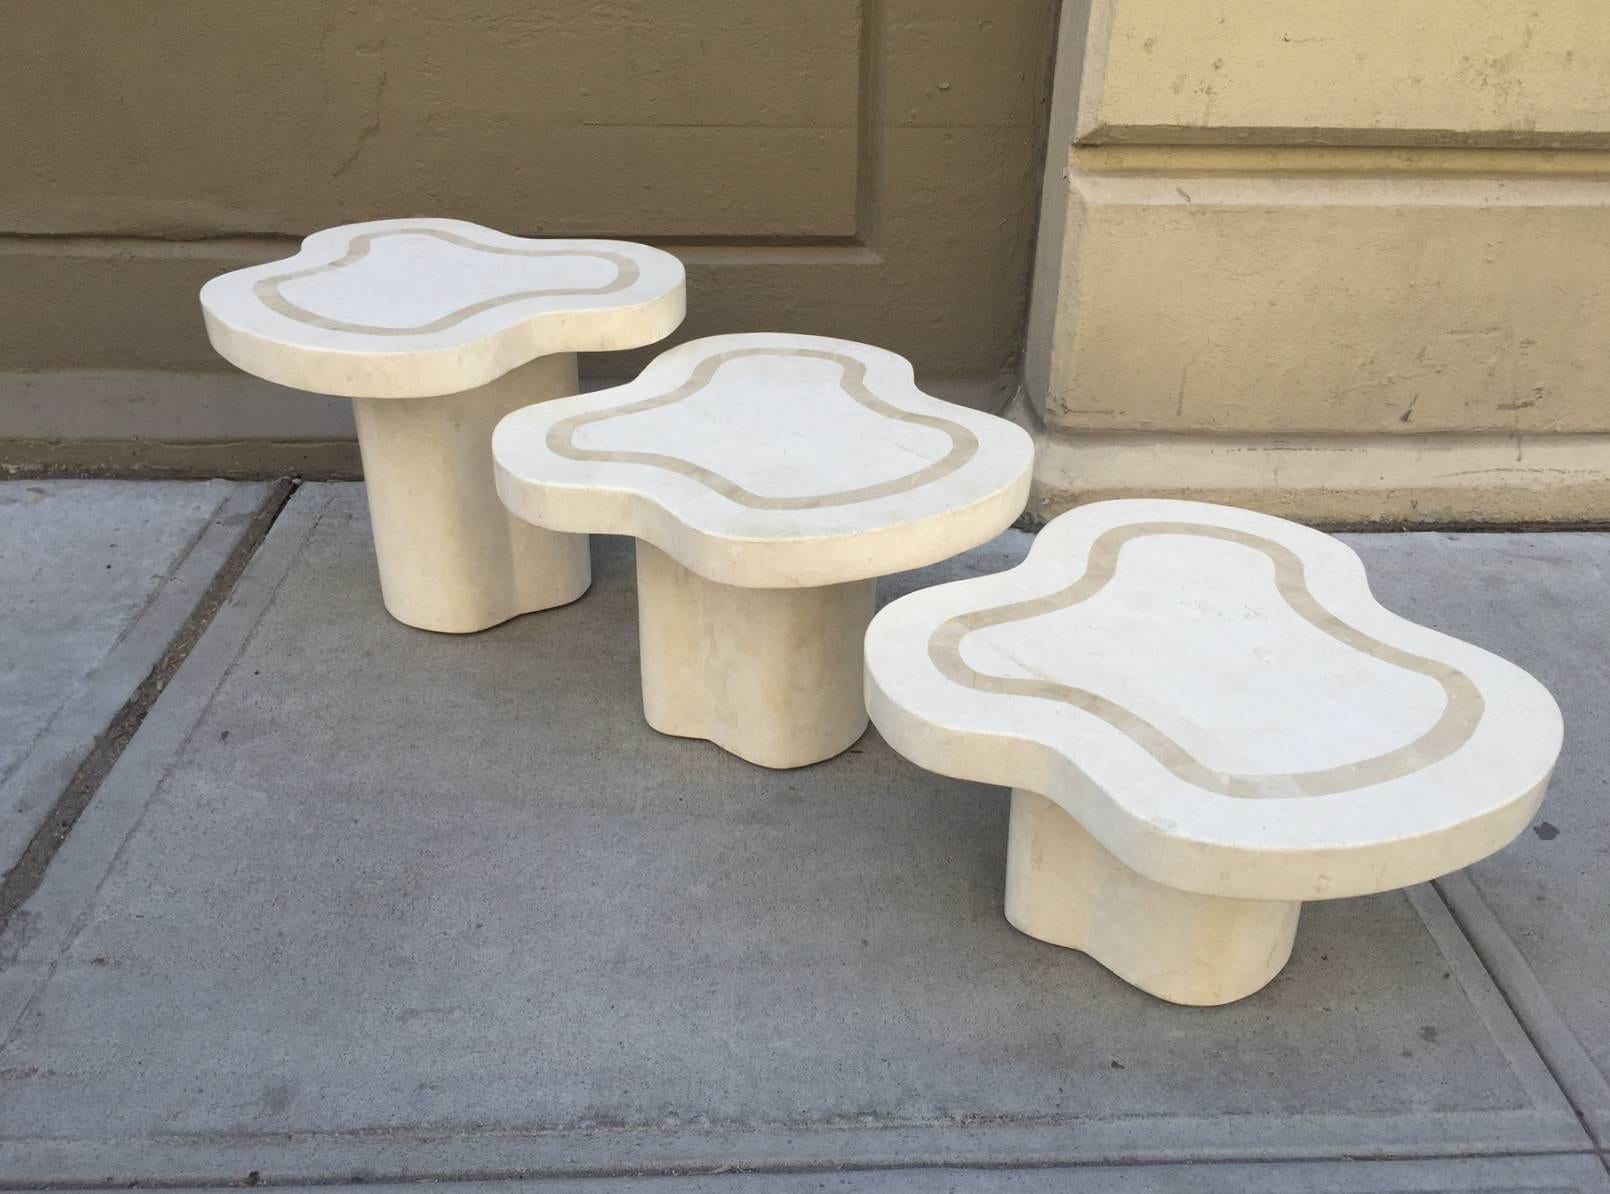 Tessellated fossil stone tables by Maitland-Smith.
Tallest table measures: 18